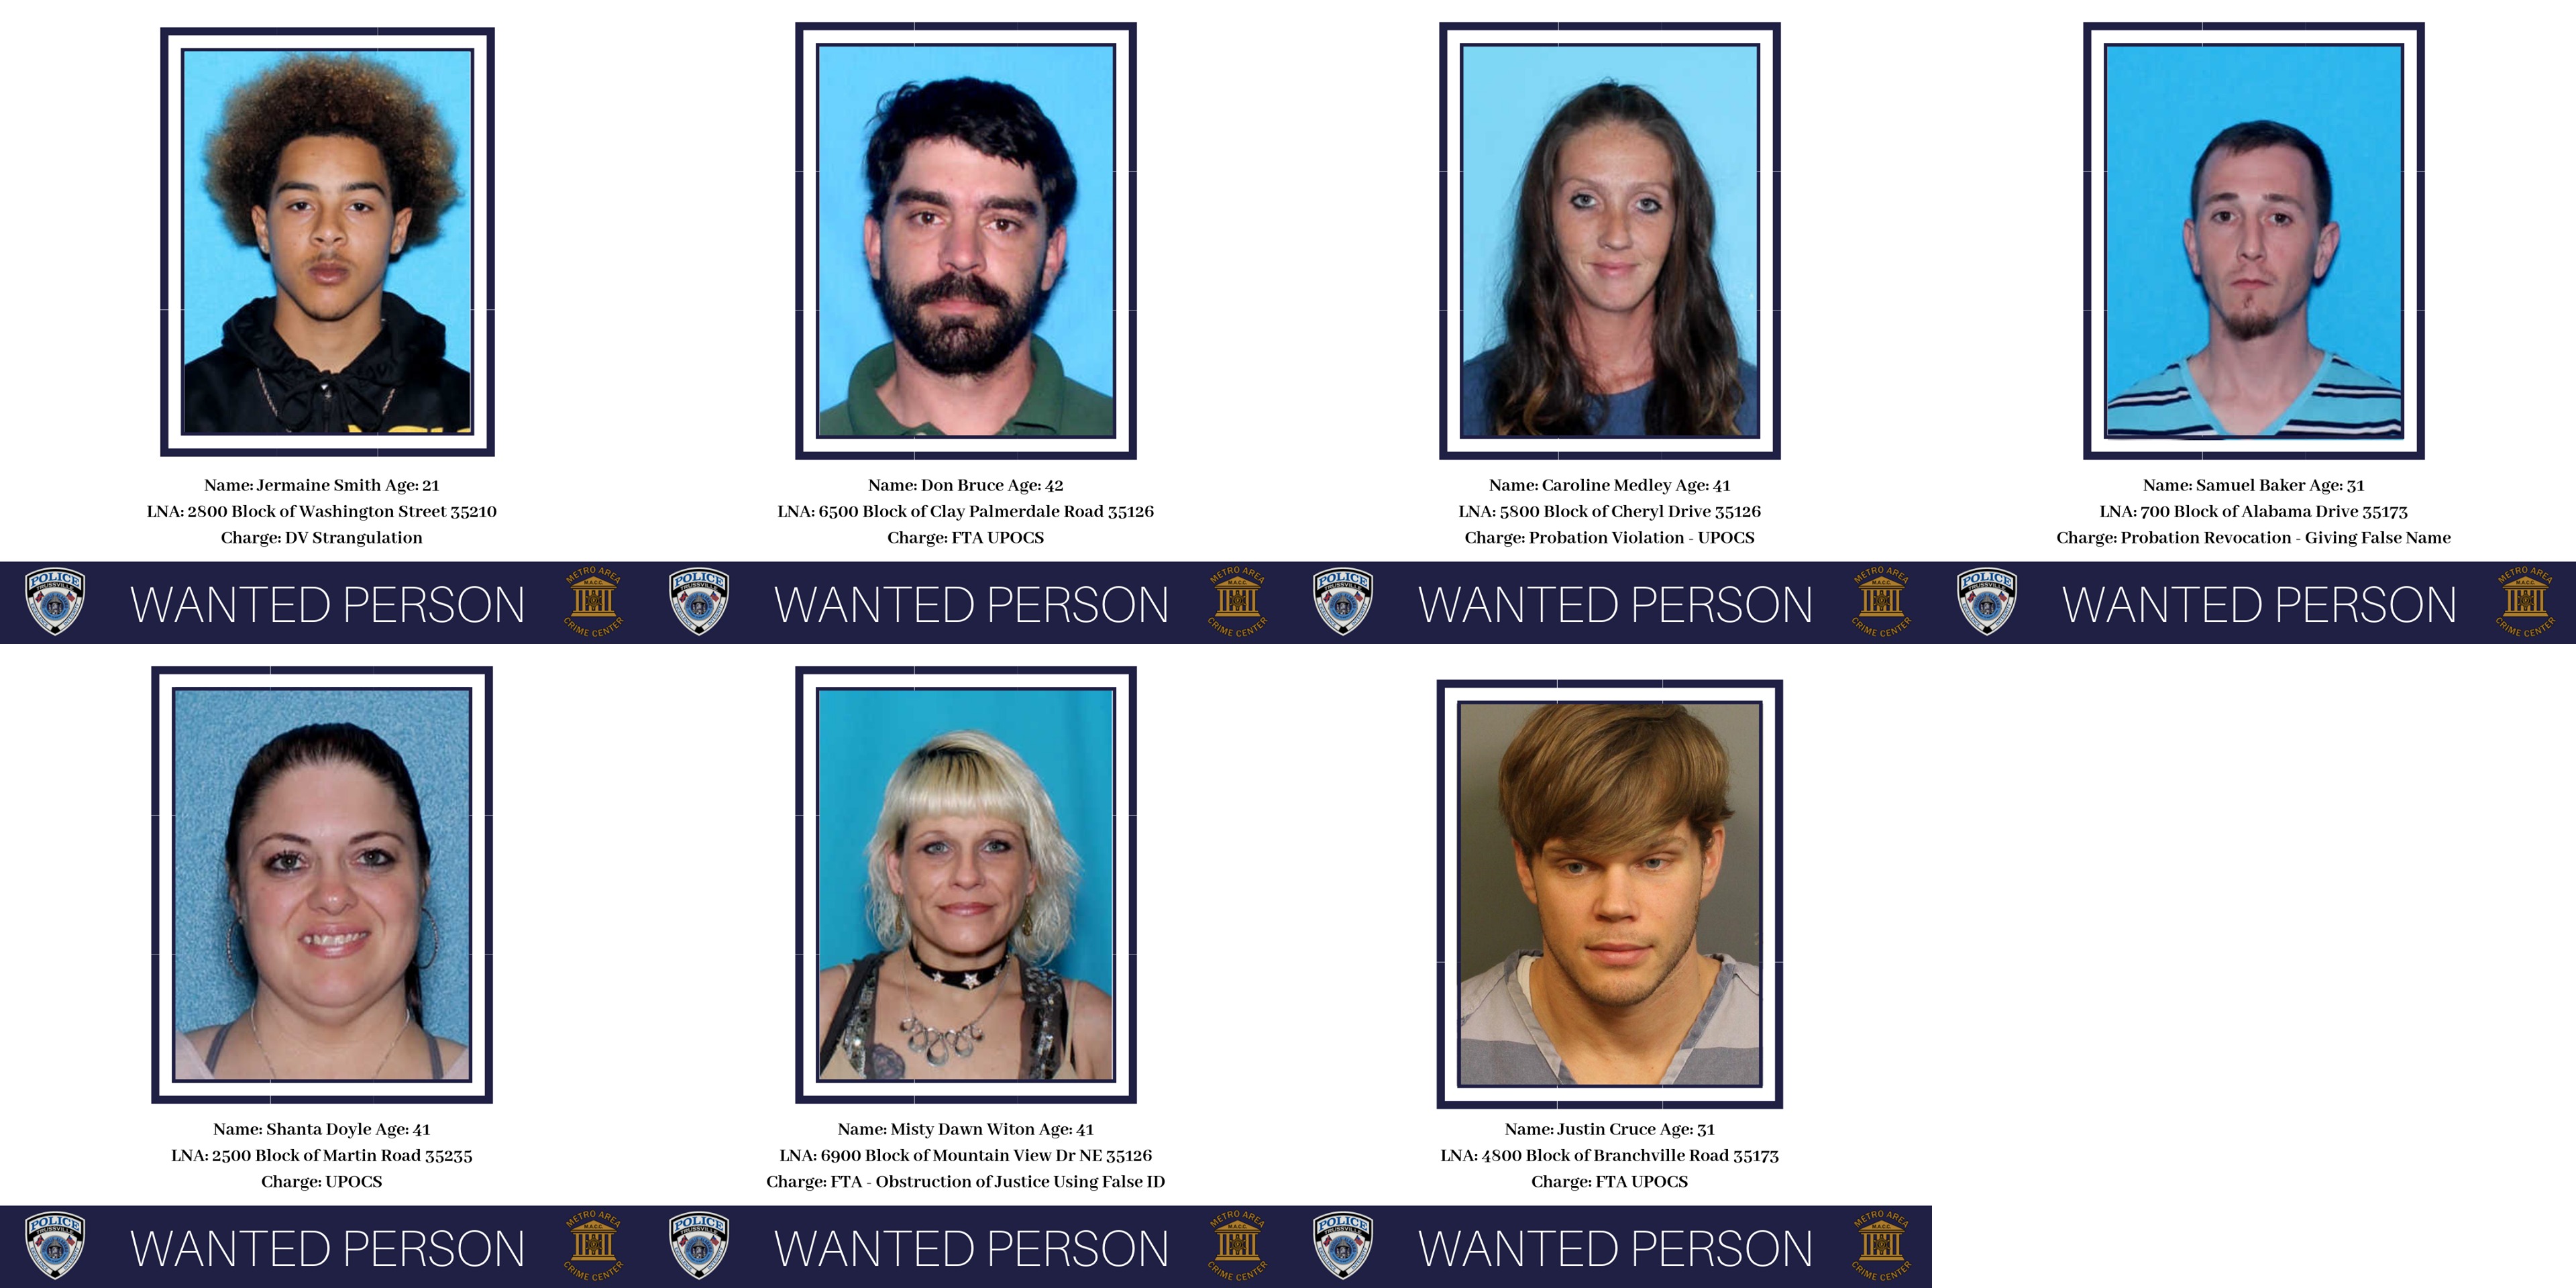 7 locals wanted by law enforcement